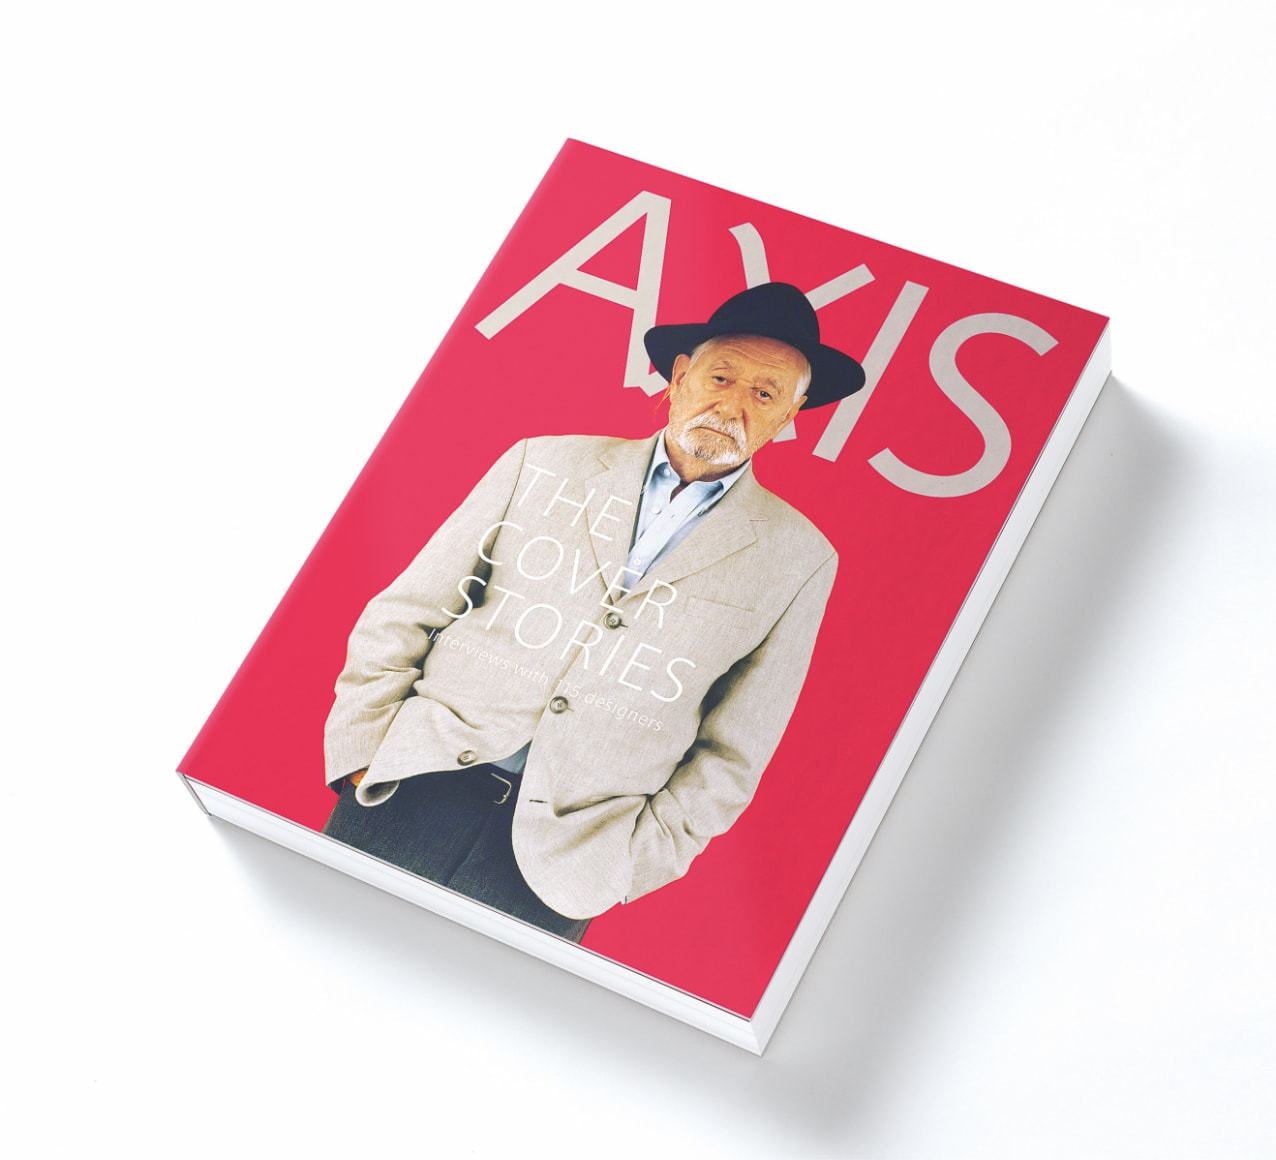 'AXIS THE COVER STORIES— Interviews with 115 designers' published